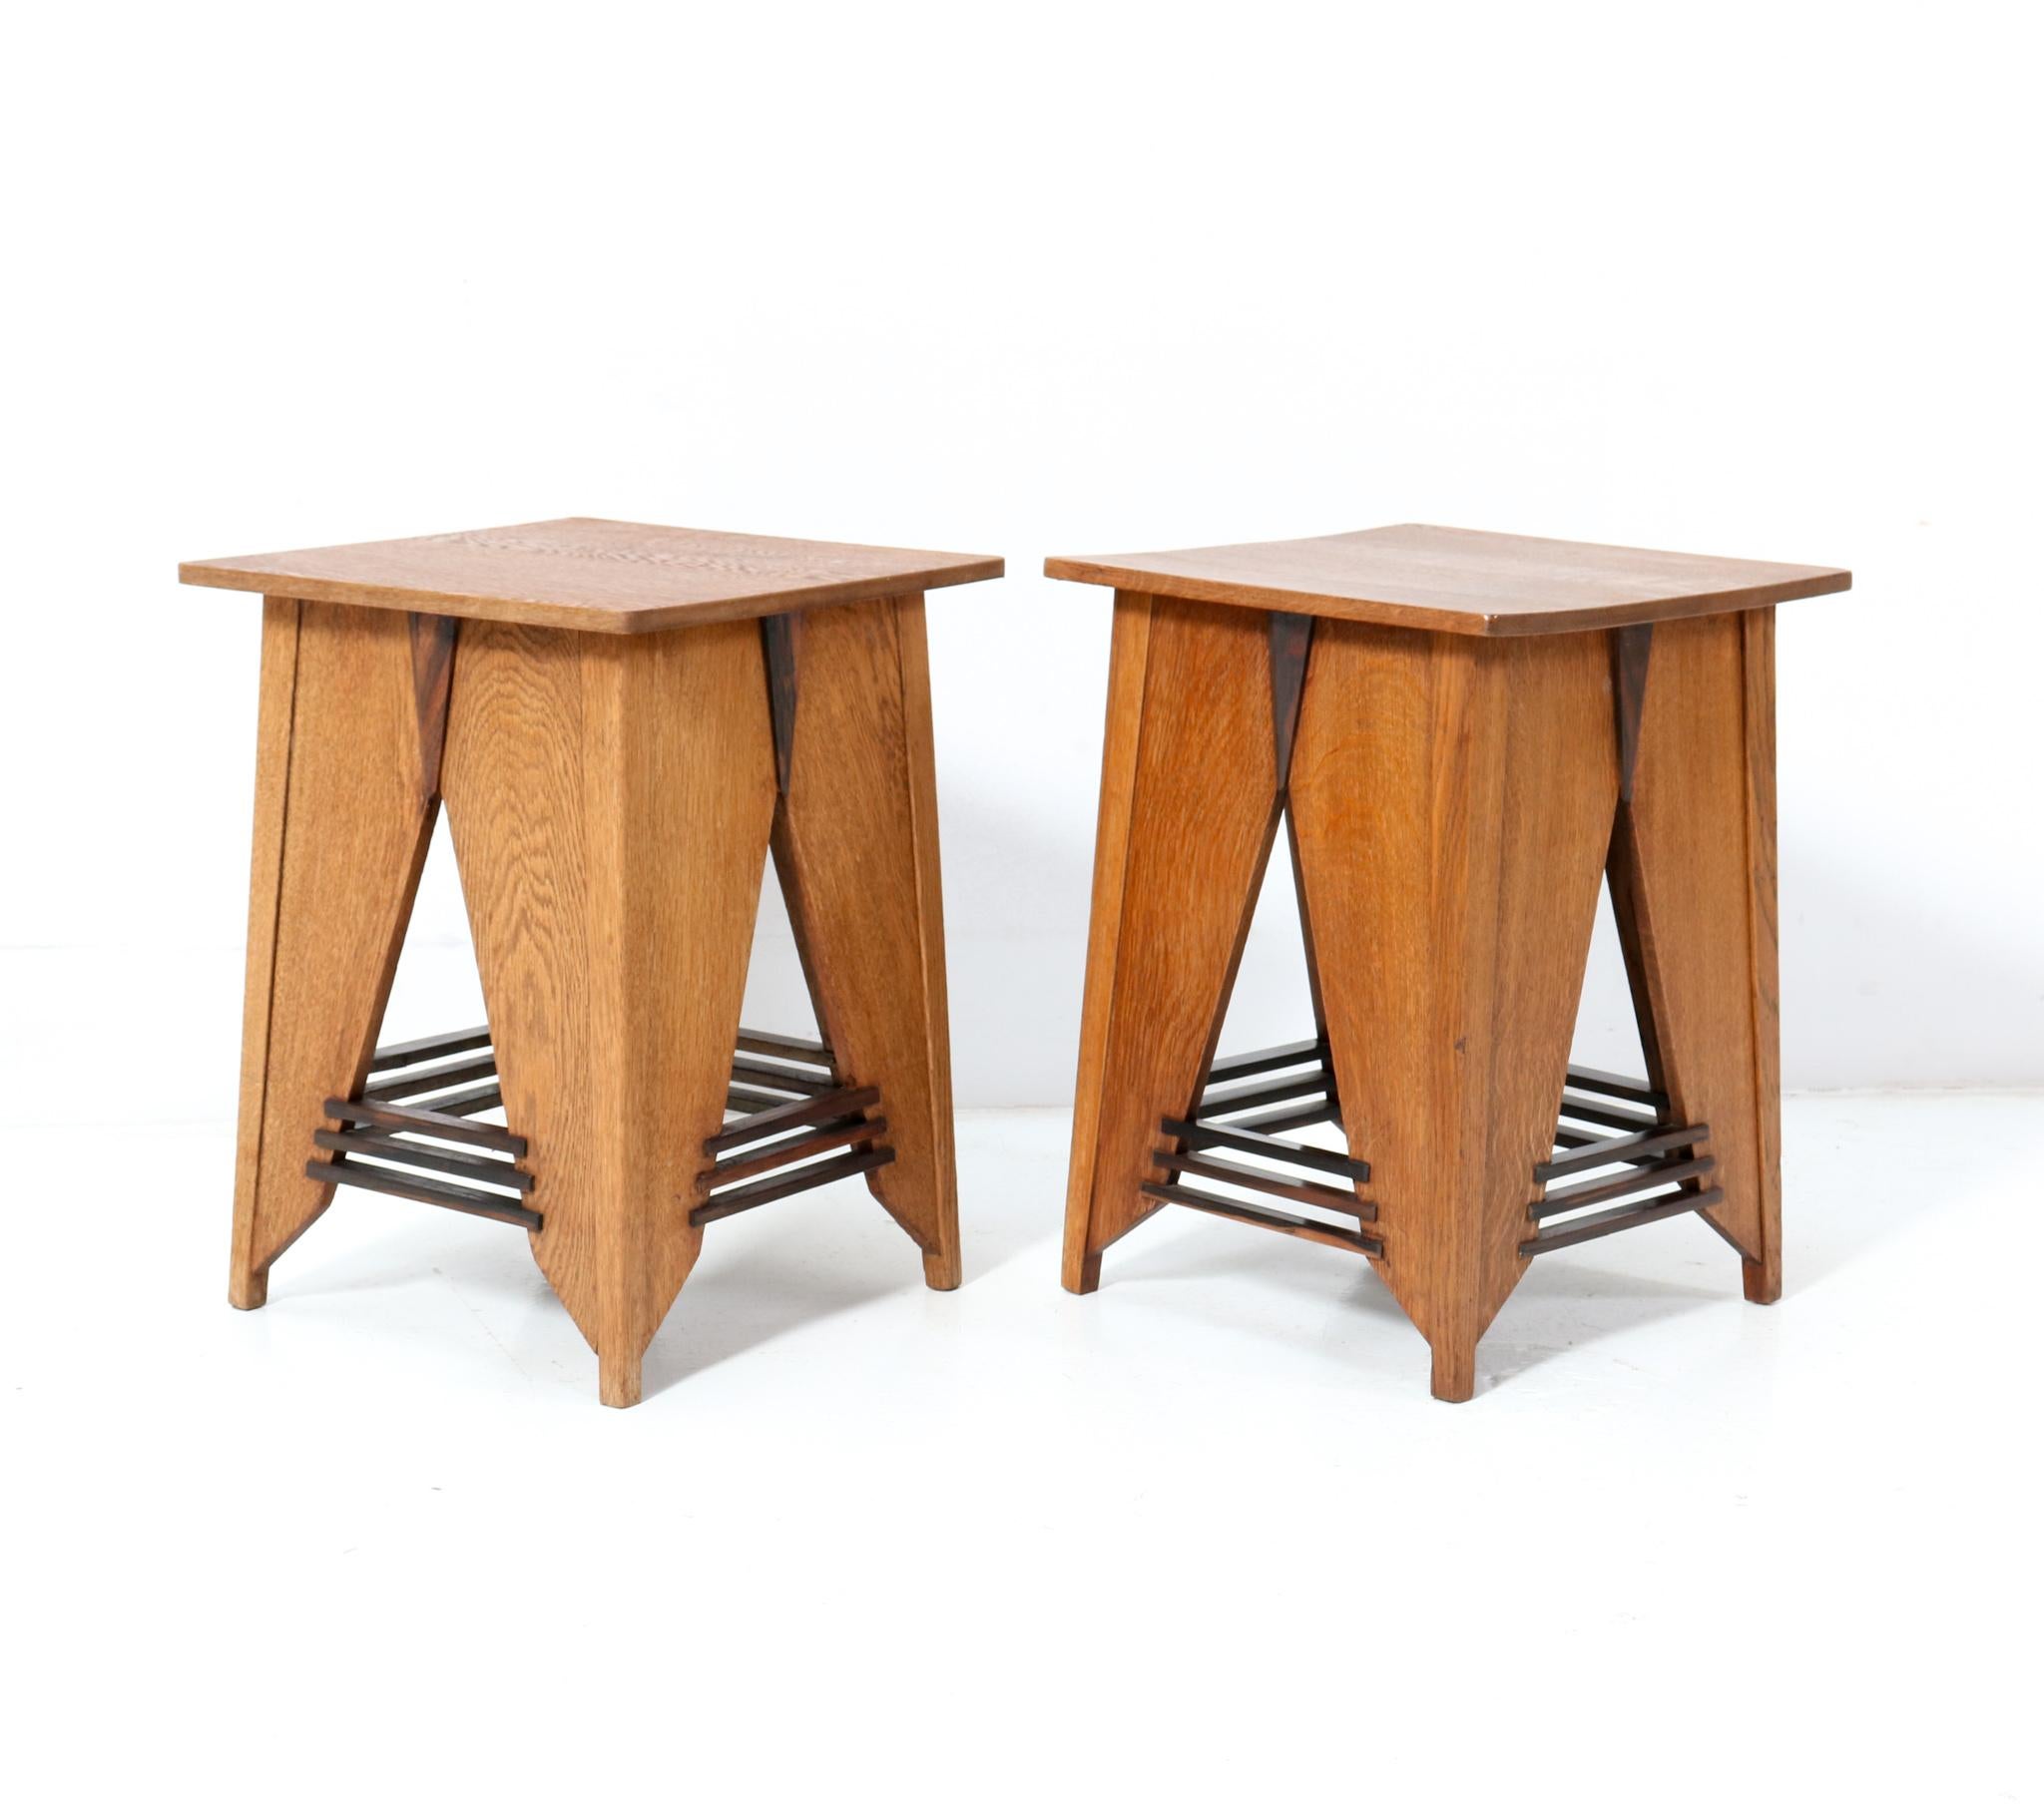 Magnificent and rare pair of Art Deco Modernist side tables.
Design by P.E.L. Izeren for De Genneper Molen.
Striking Dutch design from the 1920s.
Solid oak base with original solid macassar ebony elements.
Solid oak table tops.
In very good